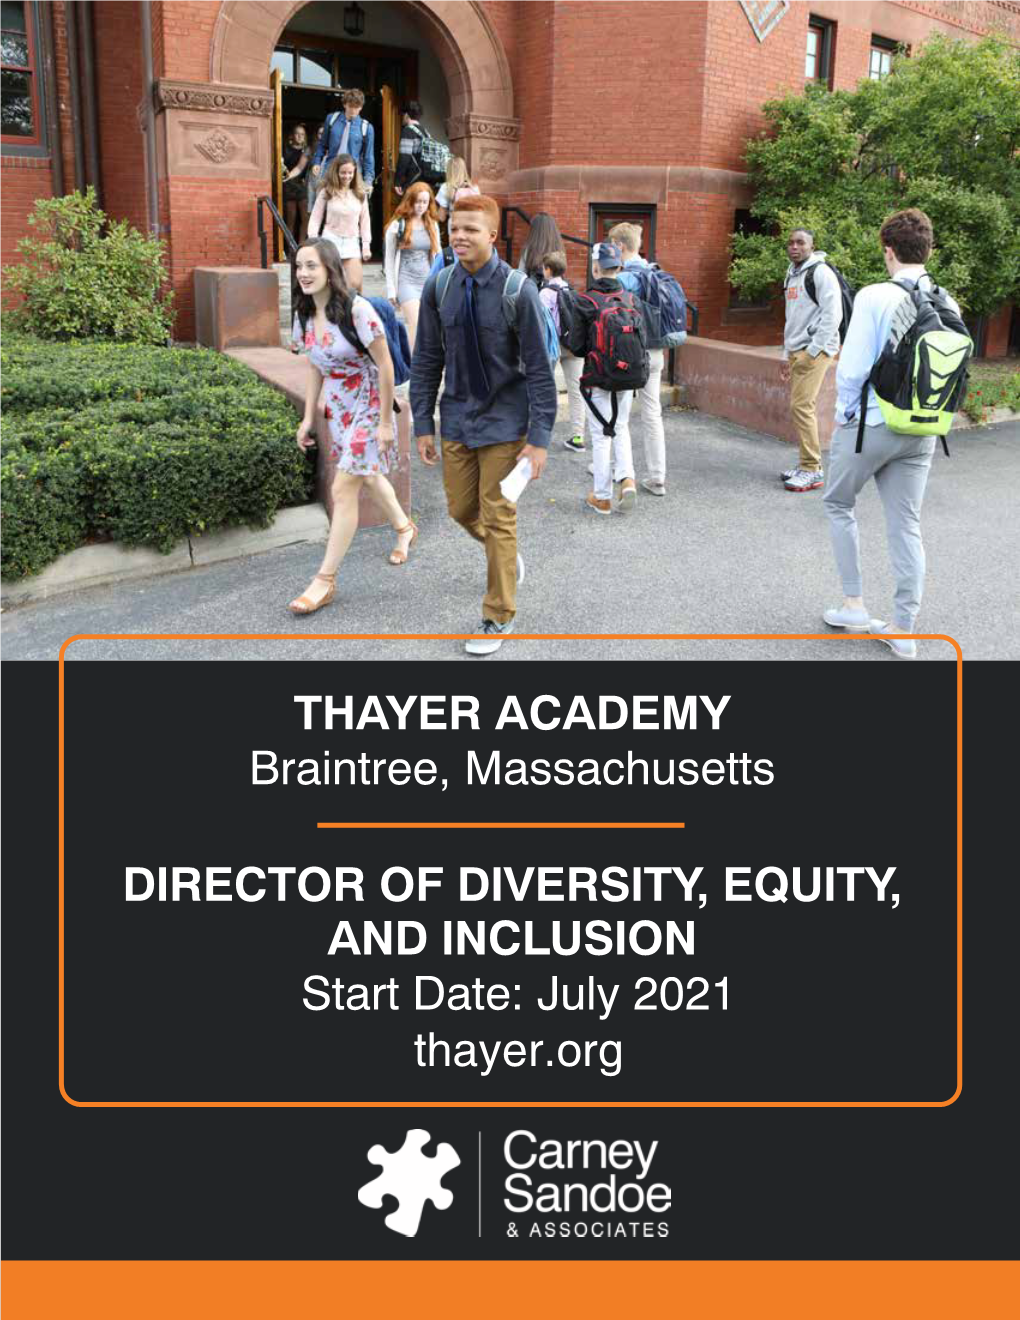 THAYER ACADEMY Braintree, Massachusetts DIRECTOR of DIVERSITY, EQUITY, and INCLUSION Start Date